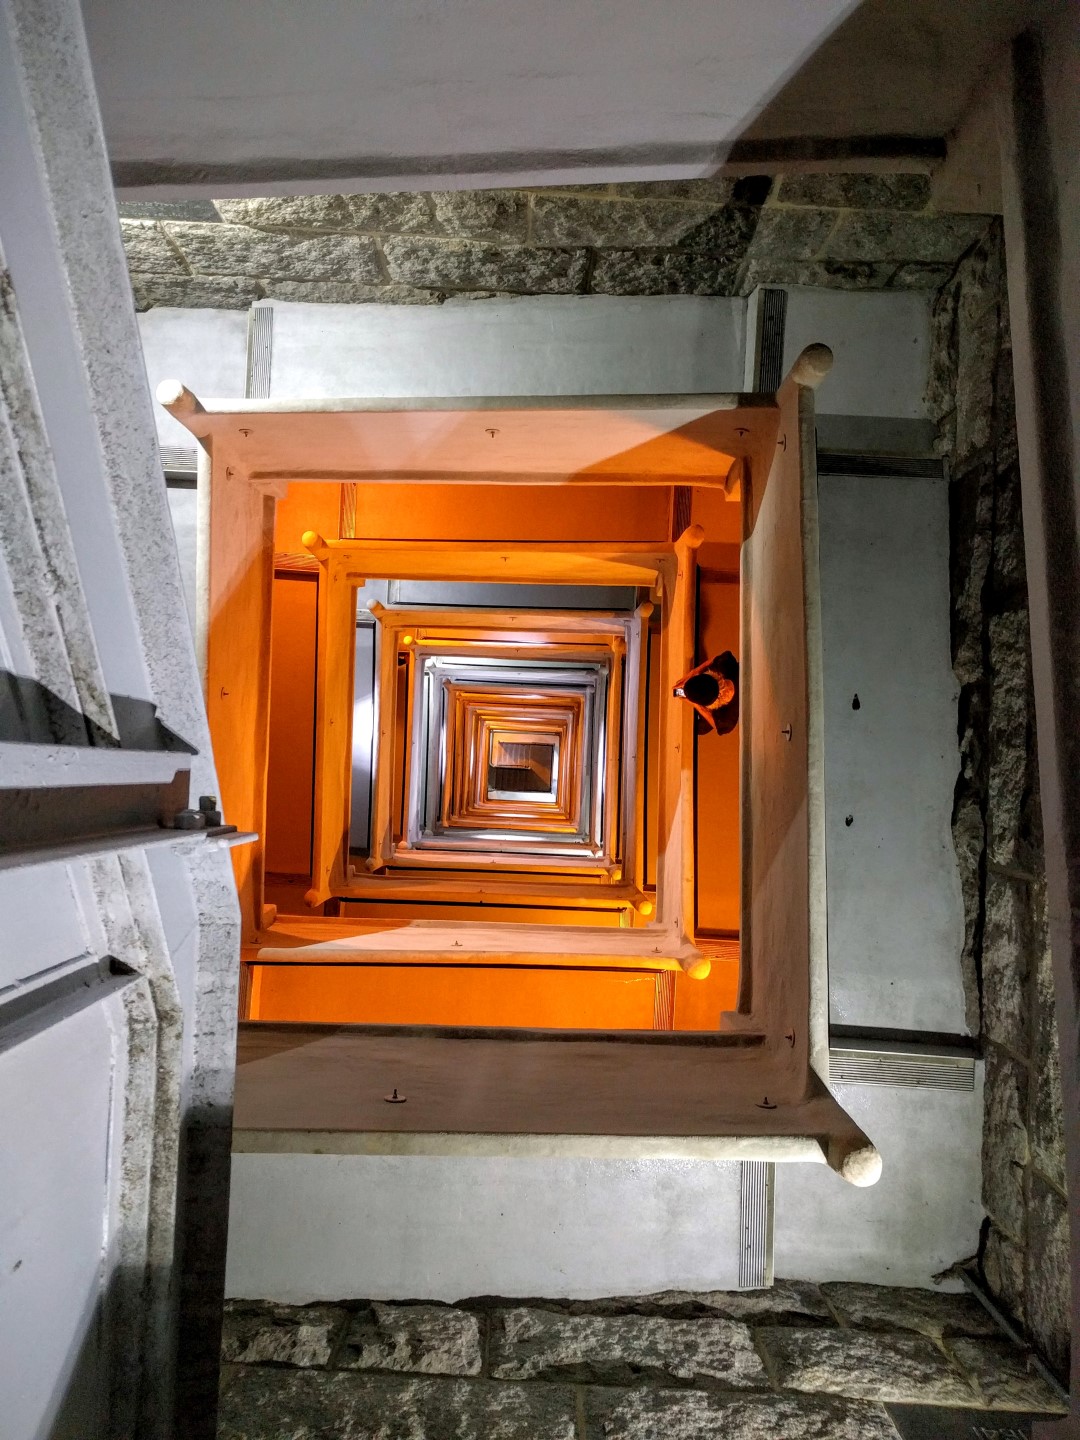 Looking down the staircase of the Pilgrim Monument